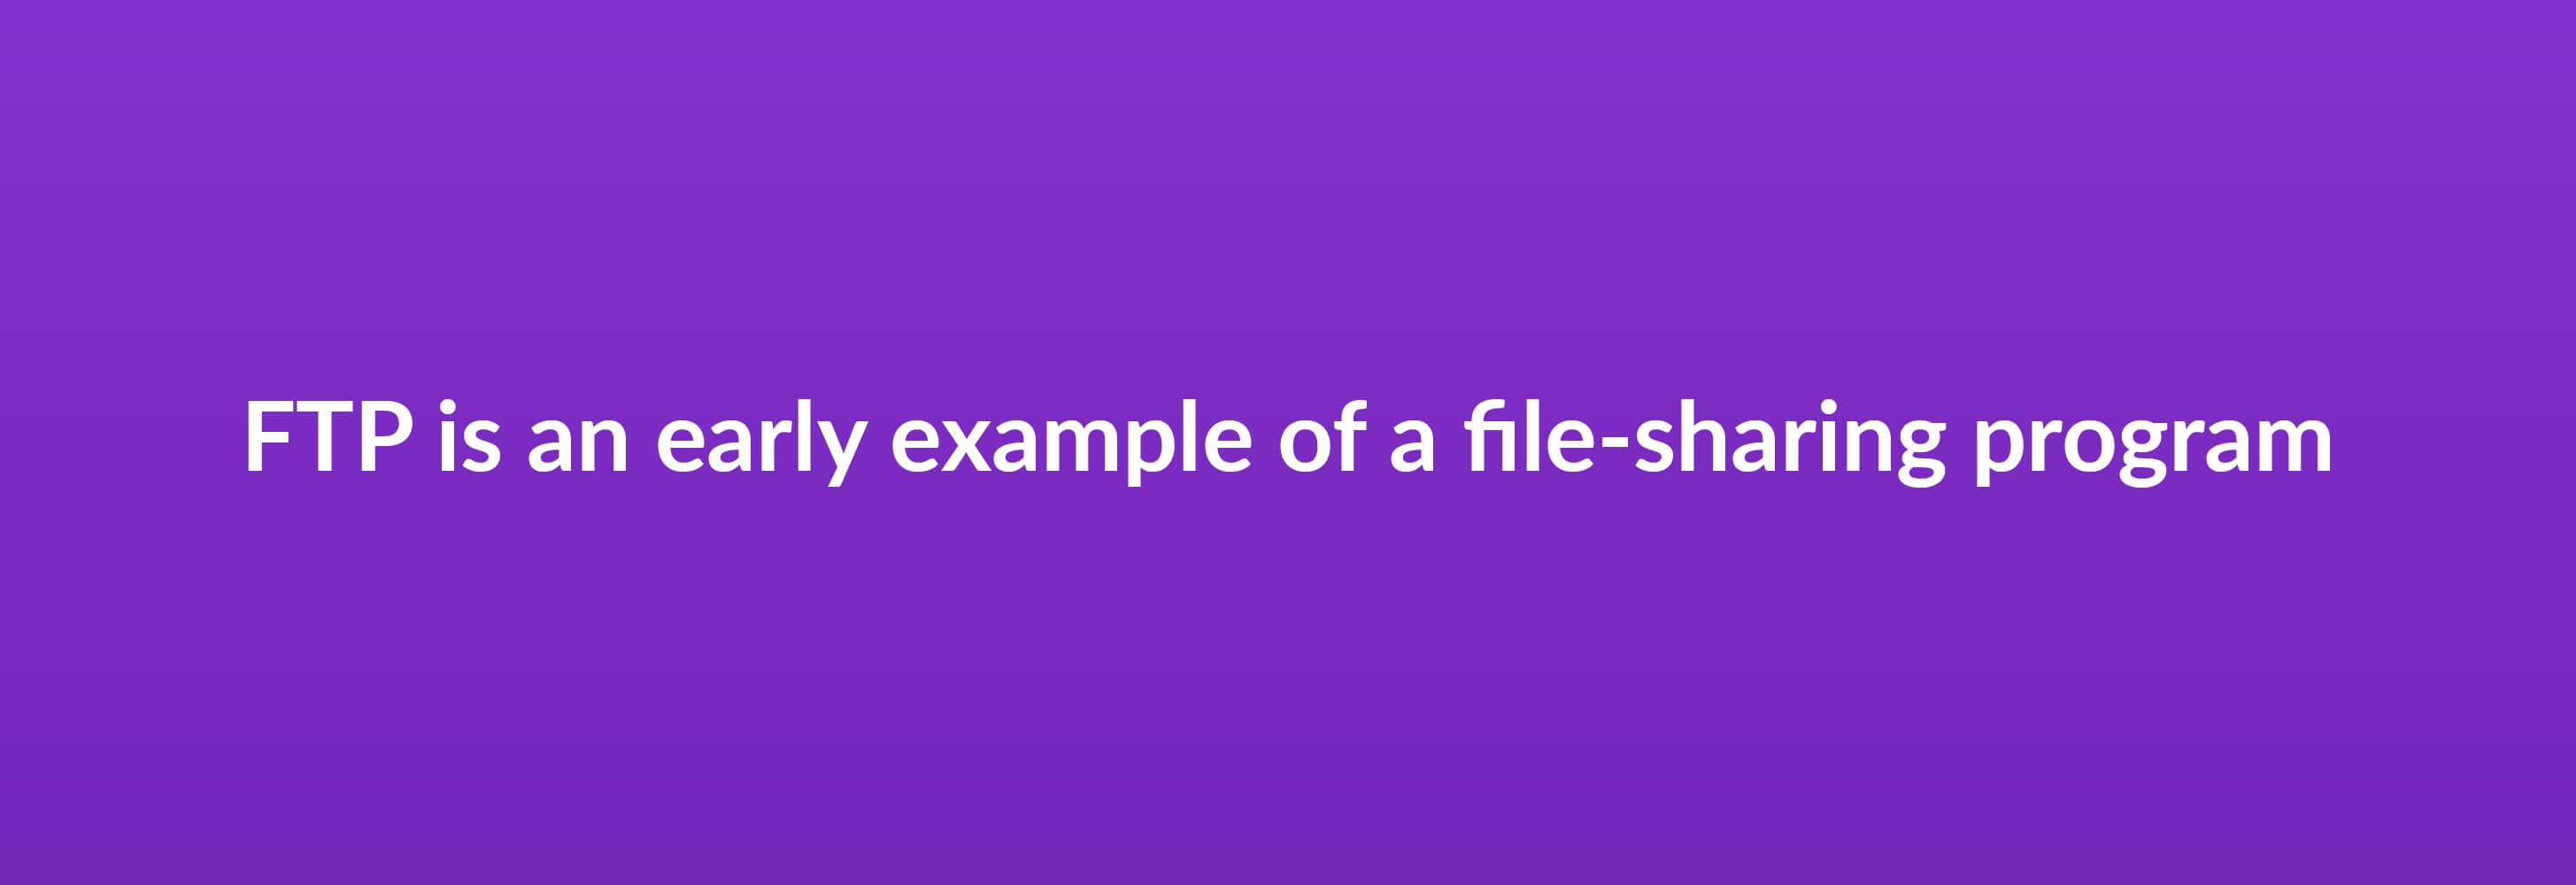 FTP is an early example of a file-sharing program